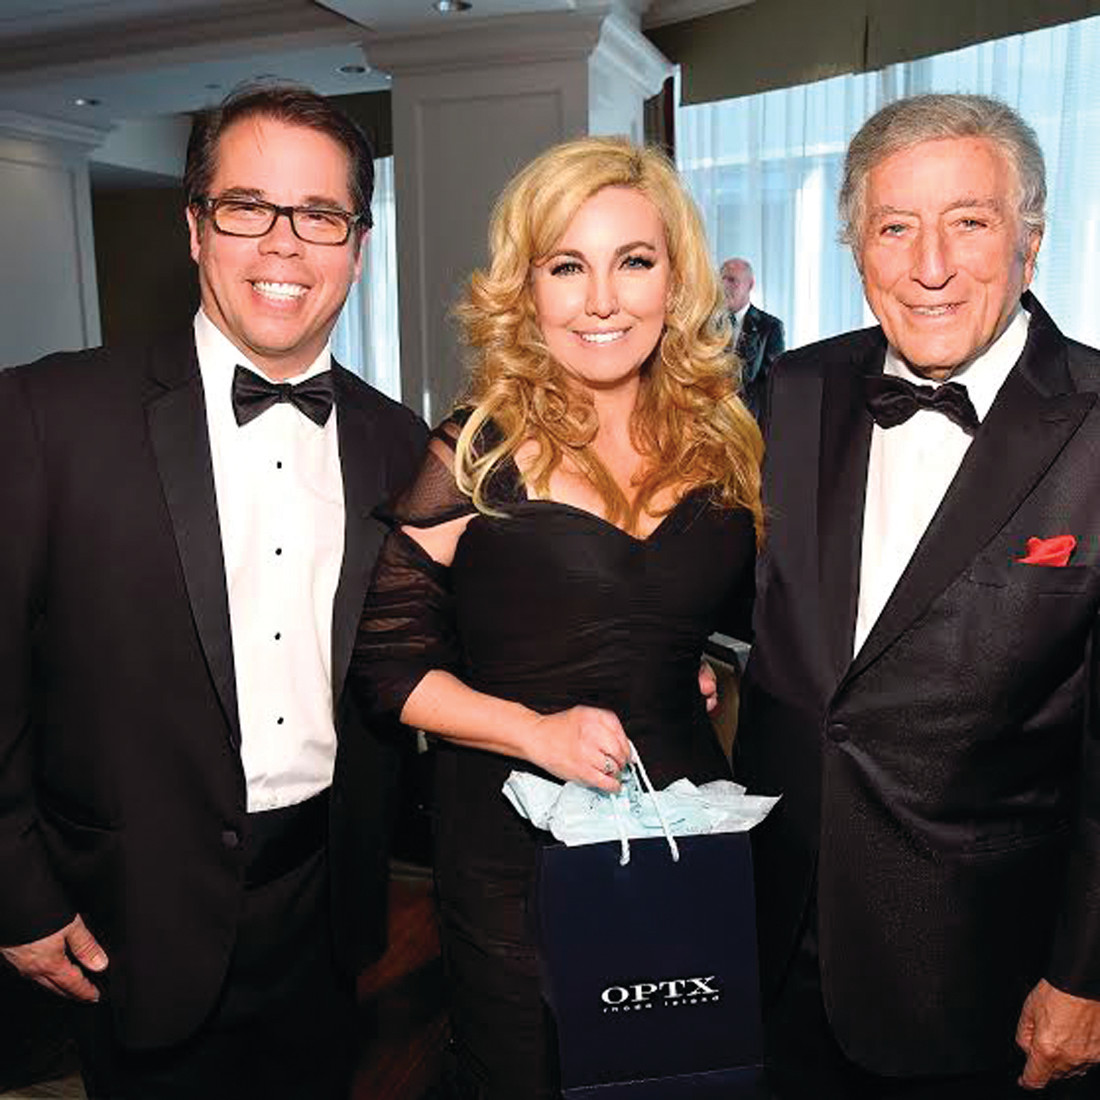 IN THE SPOTLIGHT: Legendary entertainer Tony Bennett, who’ll turn 90 on Aug. 3, joins OPTX Rhode Island owners Dr. Giulio G. Diamante and his wife Lynne Diamante, Esq., during their recent appearance at the Friars Club in New York City.